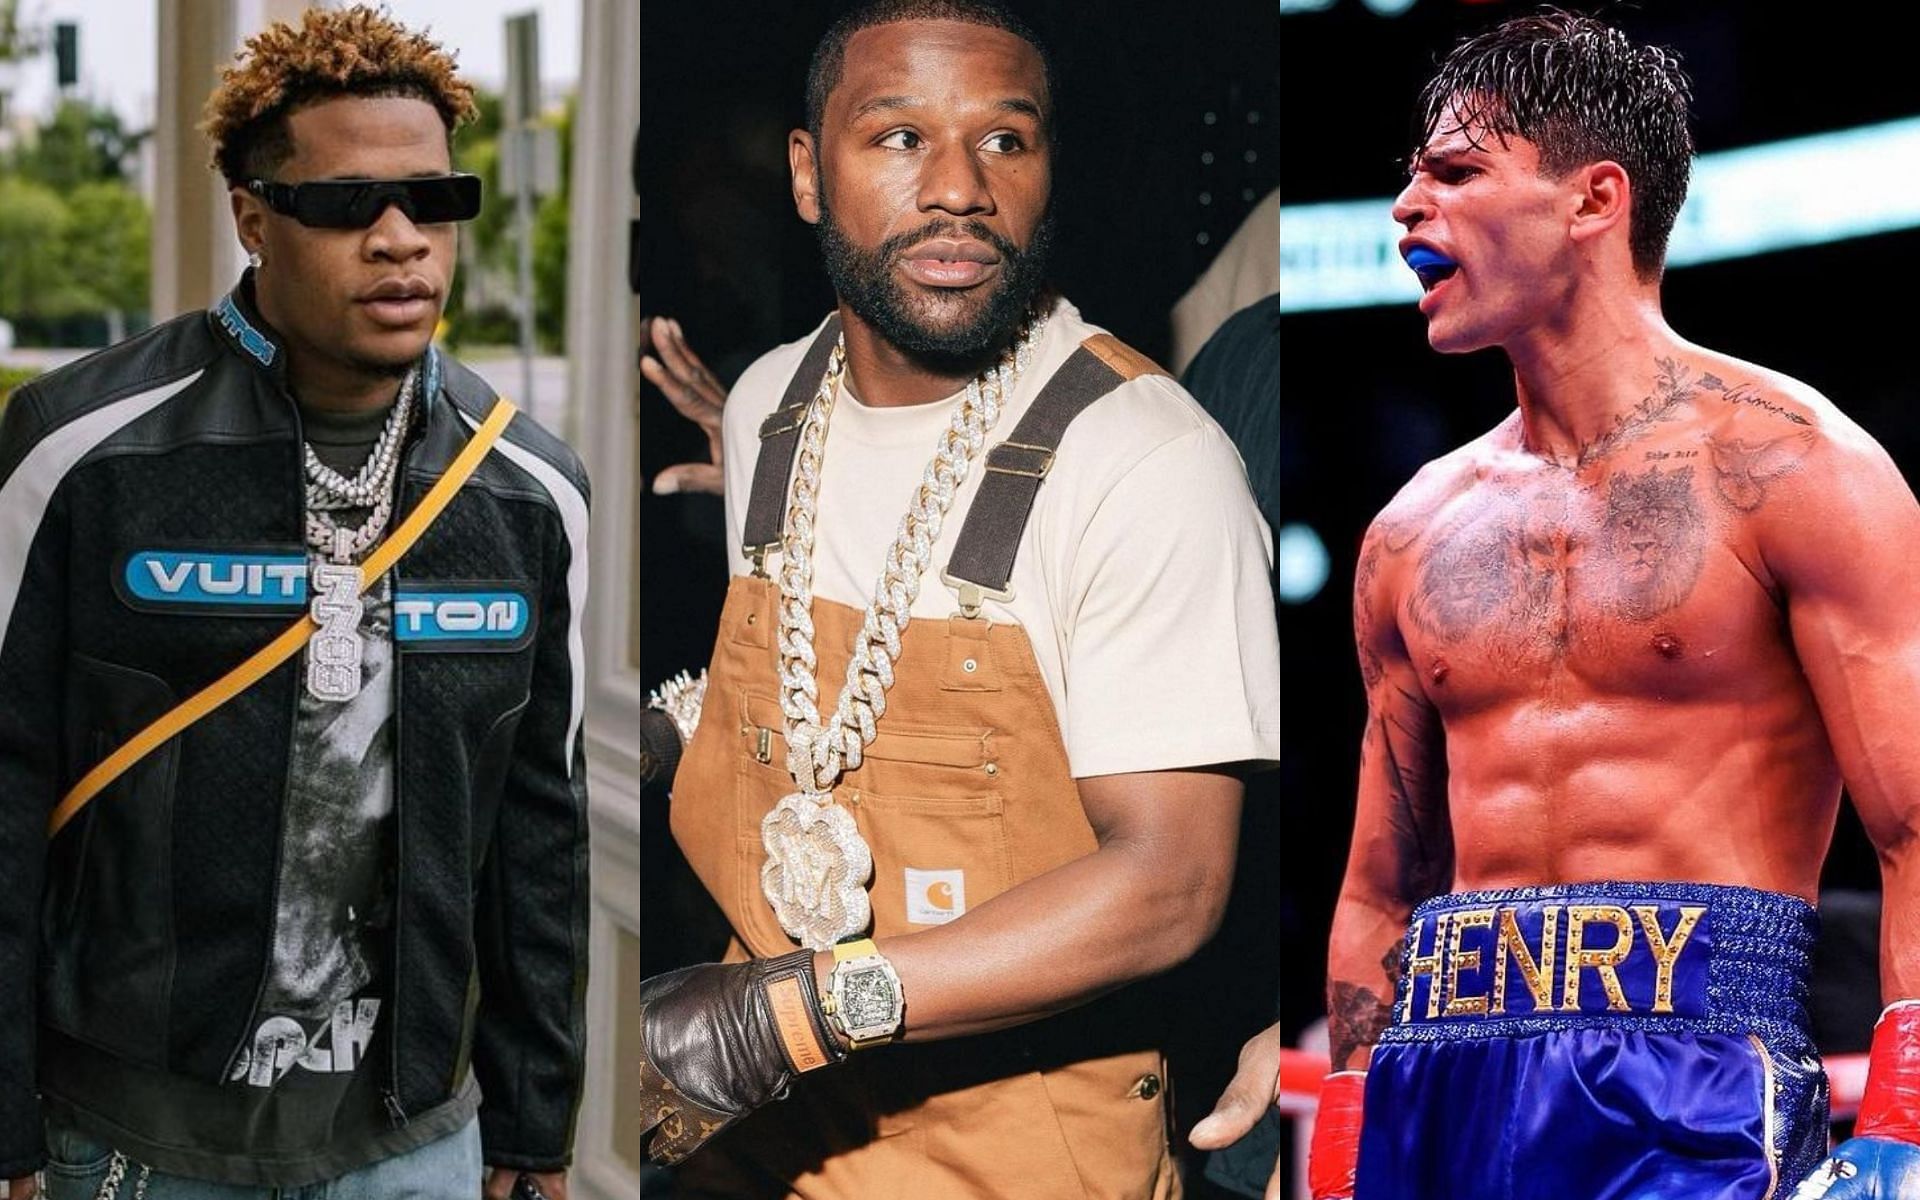 Devin Haney (left) accuses Floyd Mayweather Jr. (middle) of leaking sparring clip to Ryan Garcia (right) [Image courtesy @realdevinhaney @floydmayweather and @kingryan on Instagram]